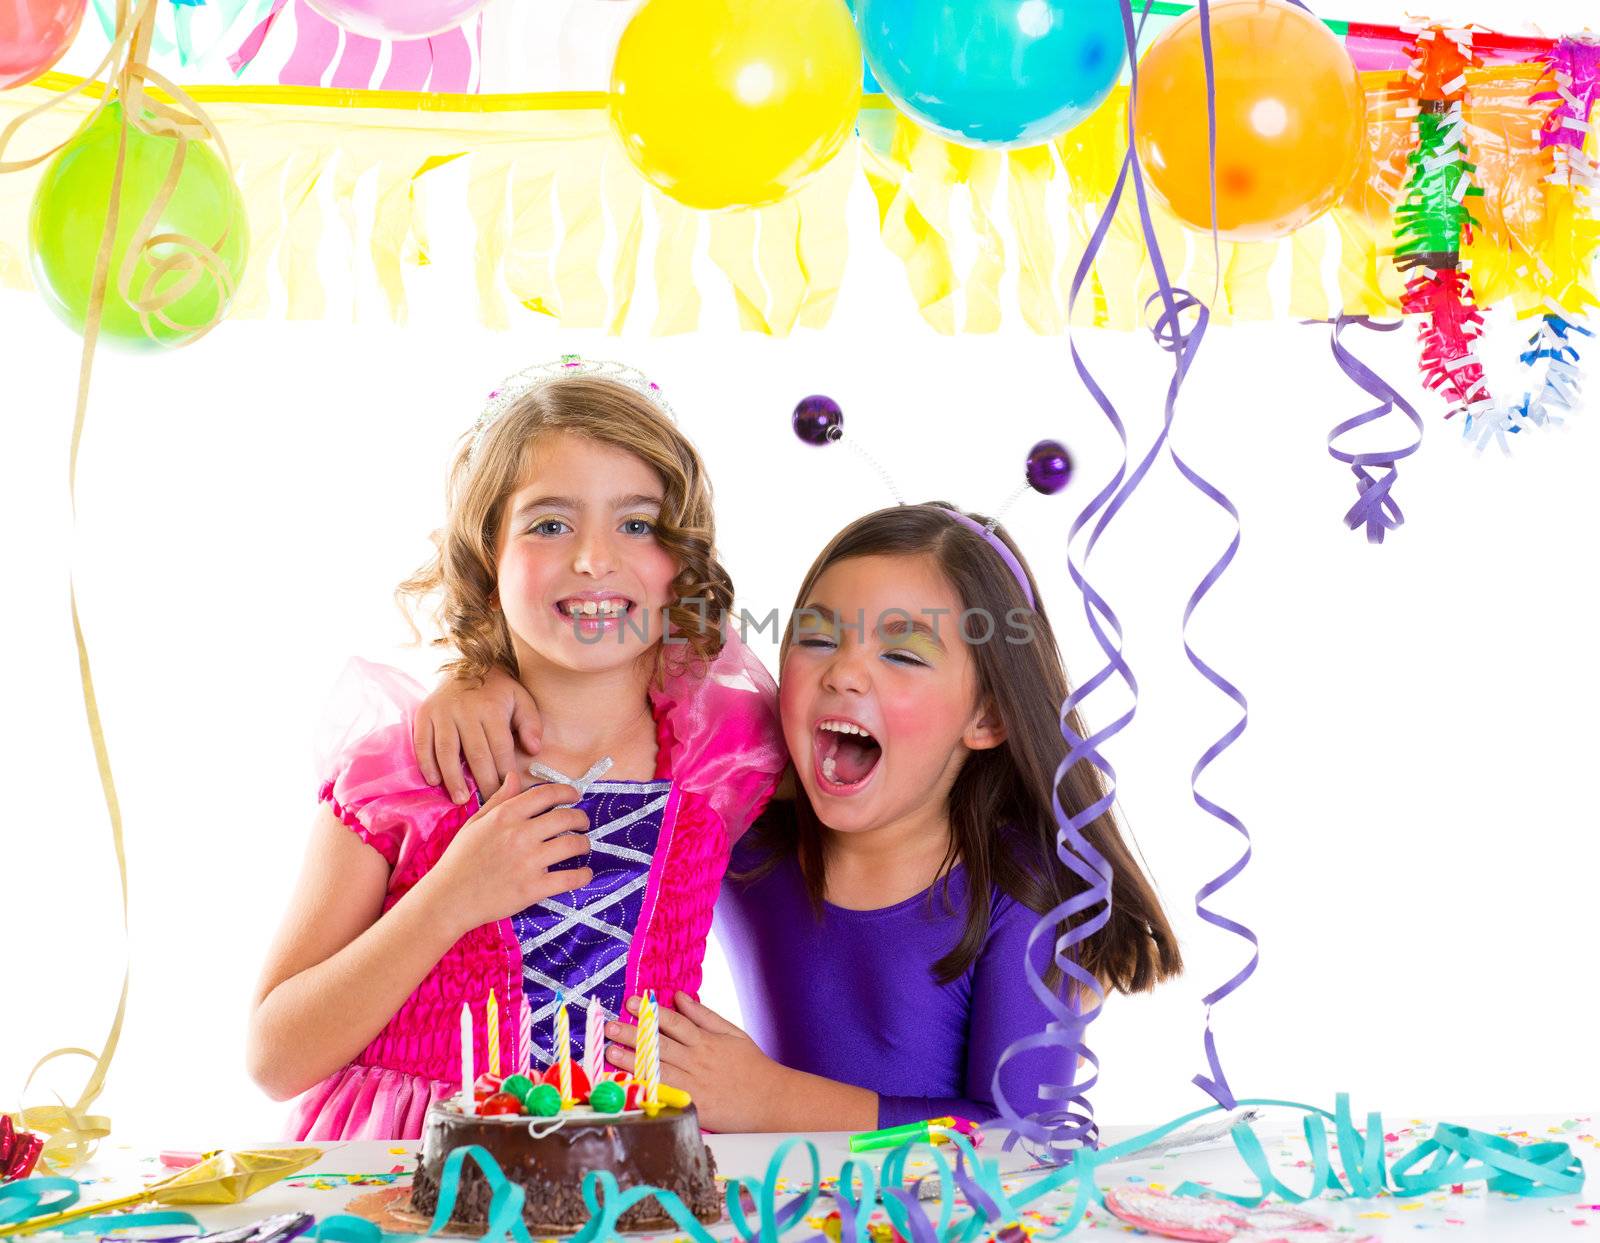 children happy hug in birthday party laughing with baloons garlands and candles cake